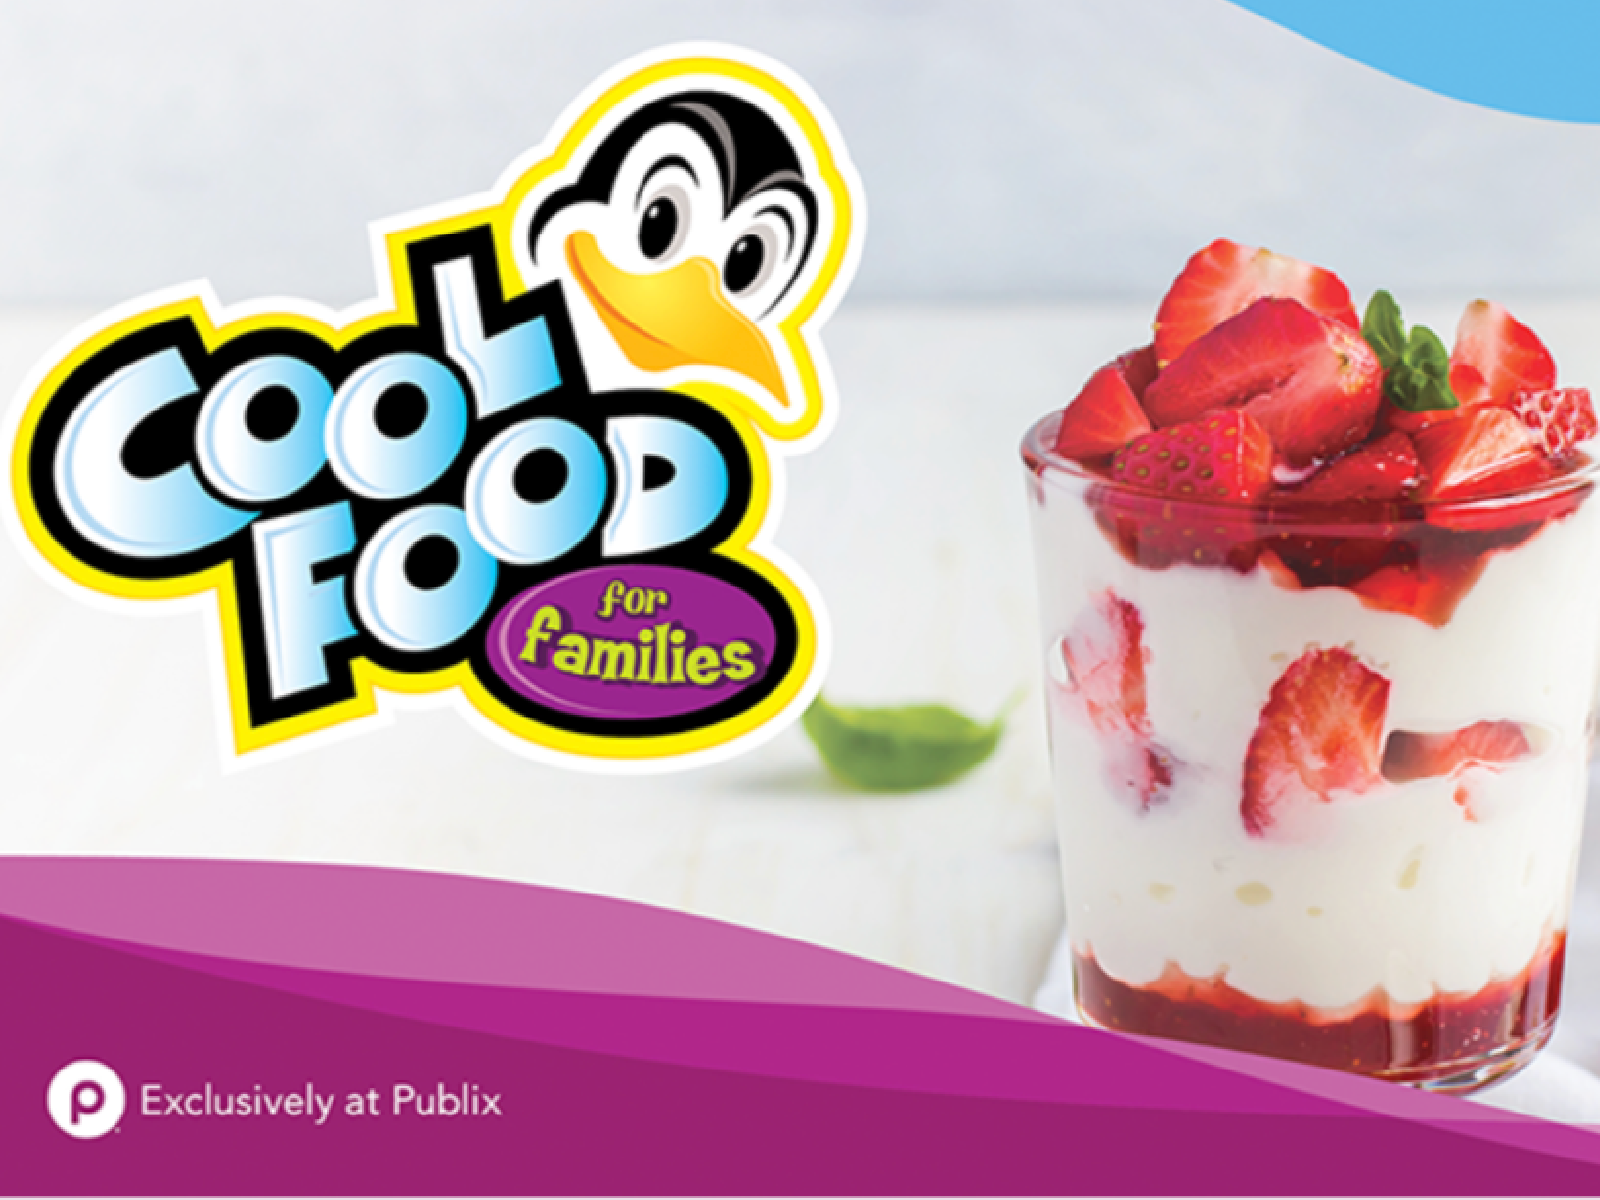 The Cool Food For Families Promo Ends Soon- Shop Through 3/26 At Publix